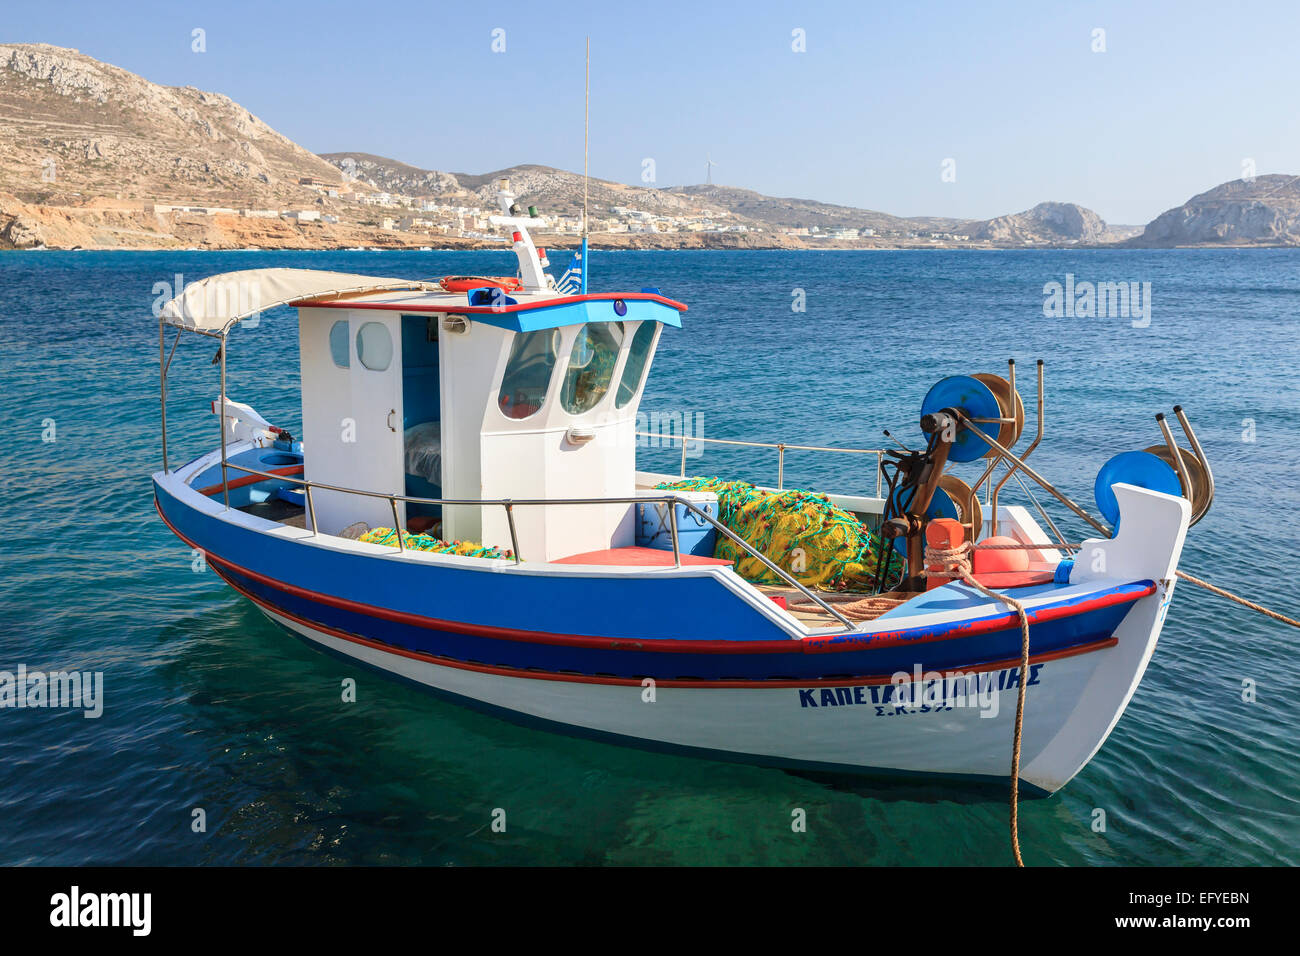 Fishing boat in the harbour, Finiki, Karpathos, Dodecanese, South Aegean, Greece Stock Photo